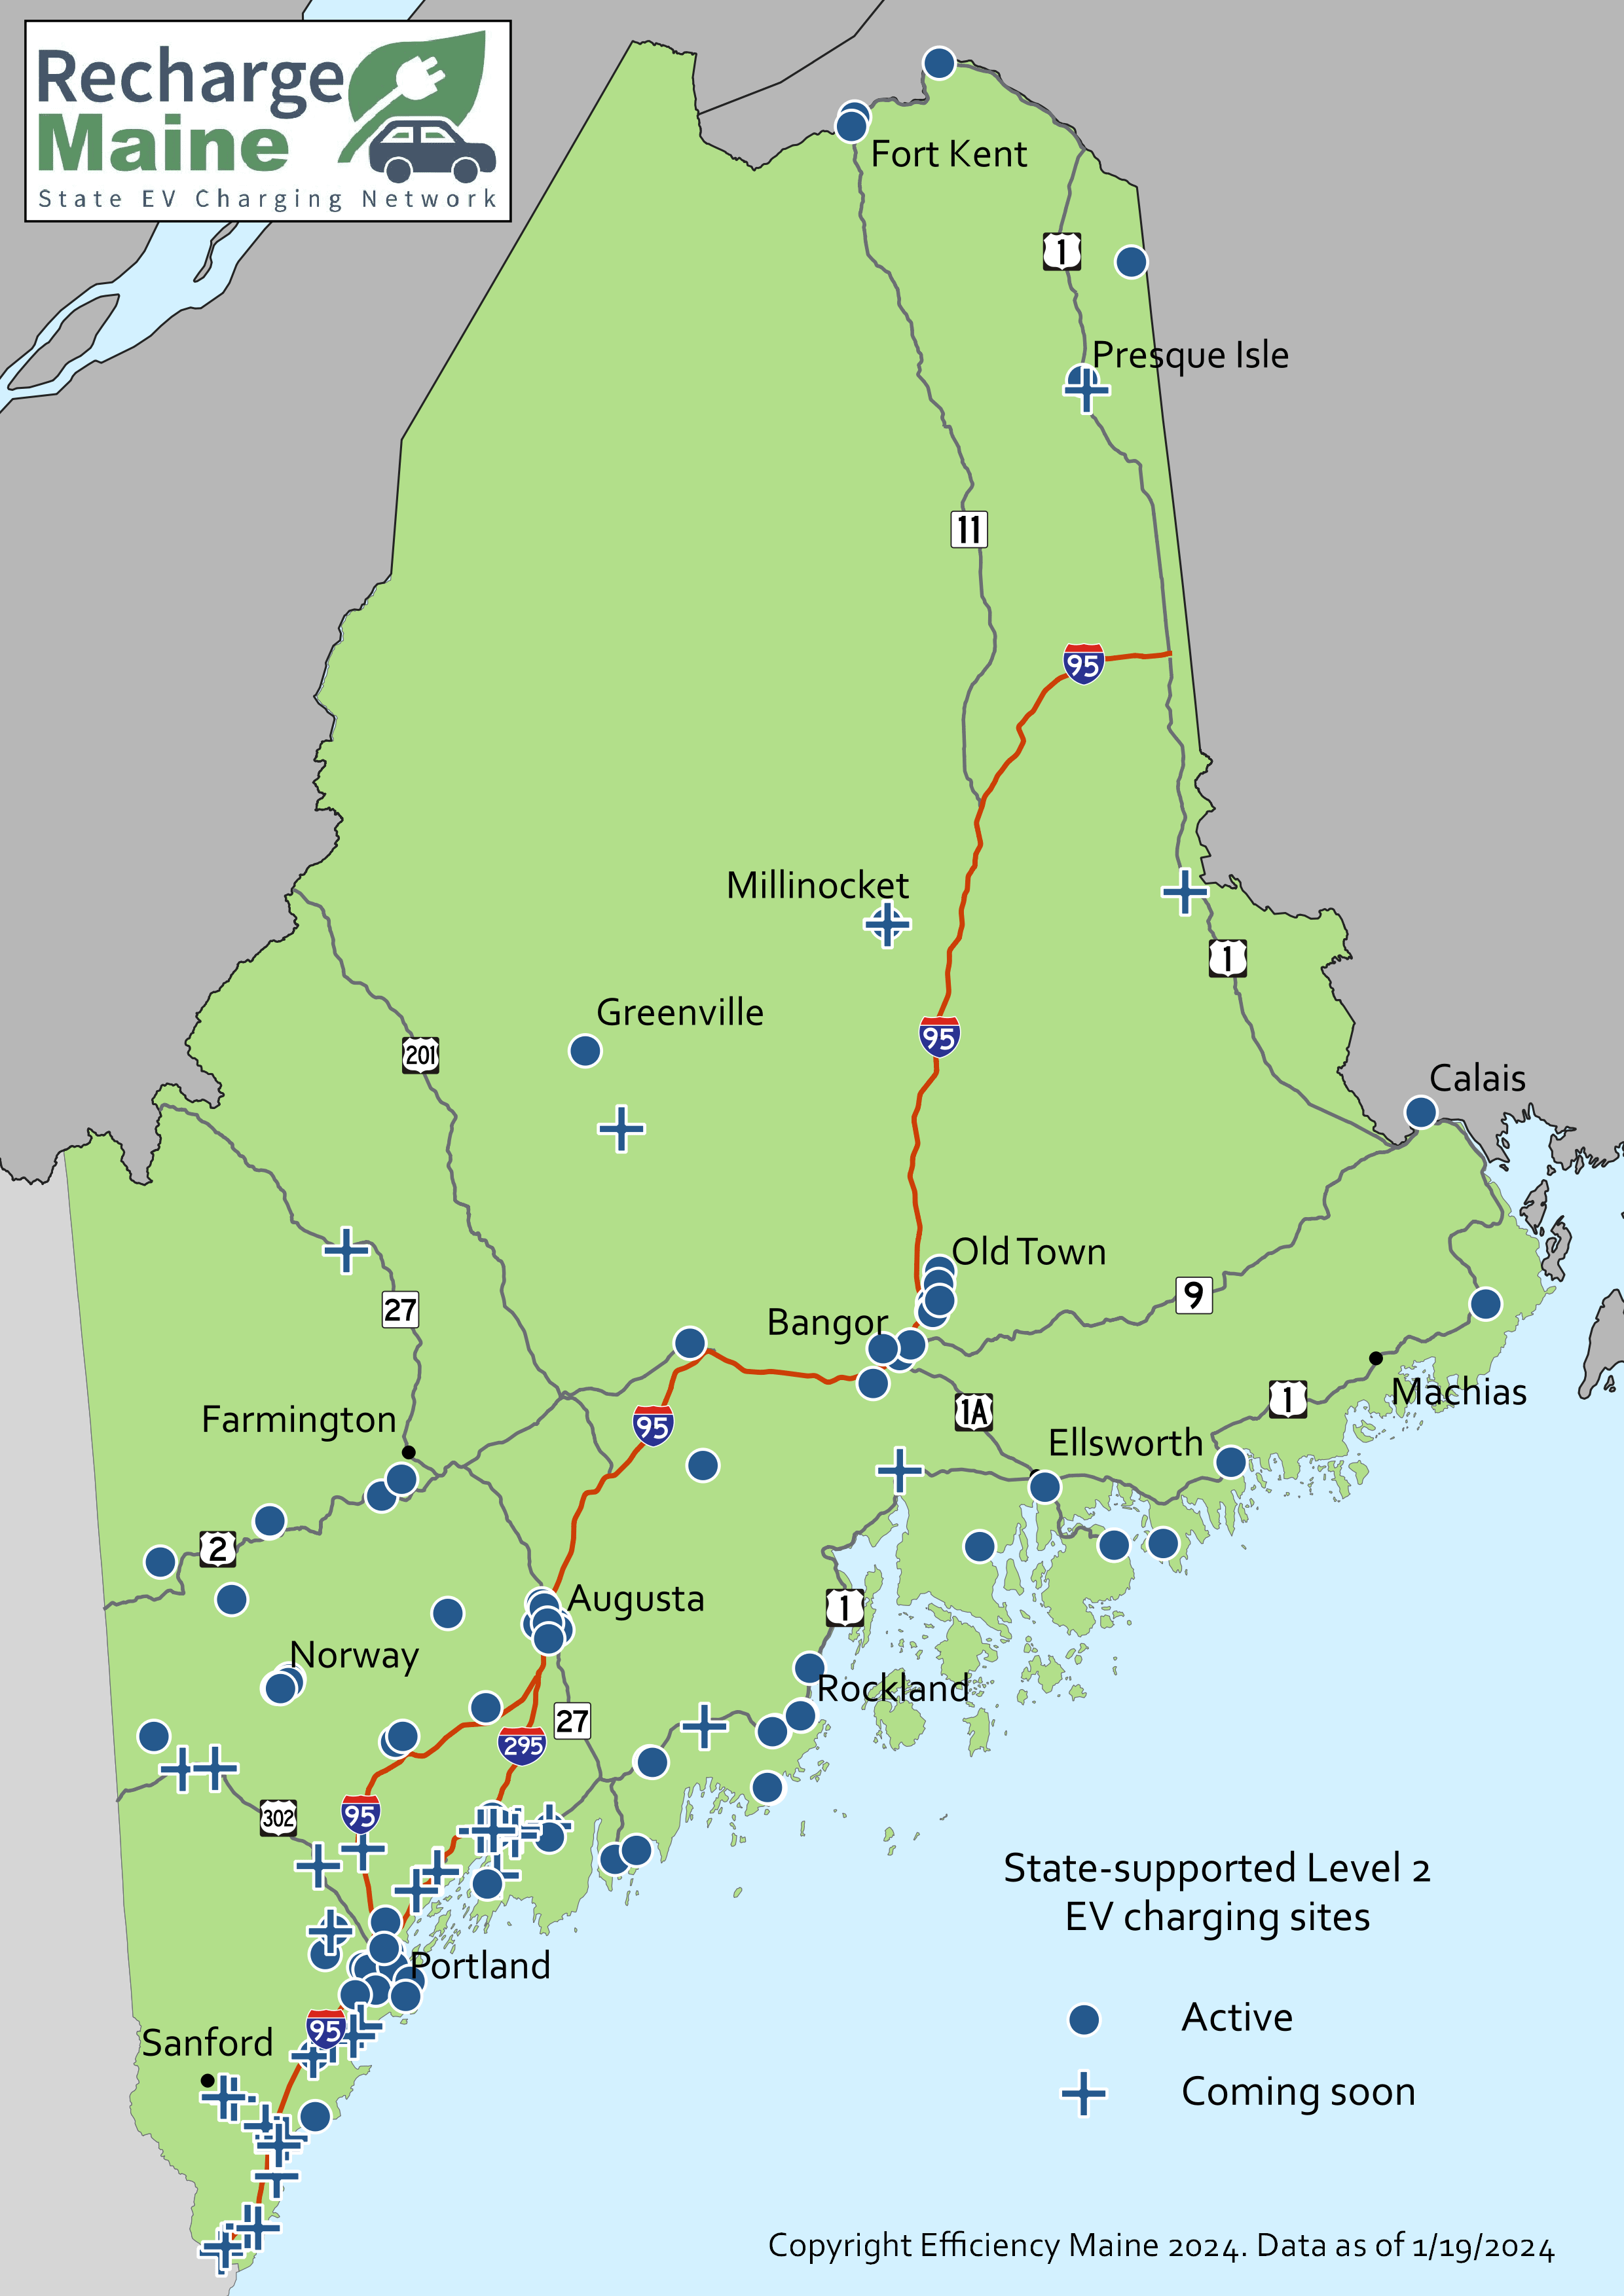 Map of Electric Vehicle Charging Sites that have received funding or plan to receive funding from Efficiency Maine.